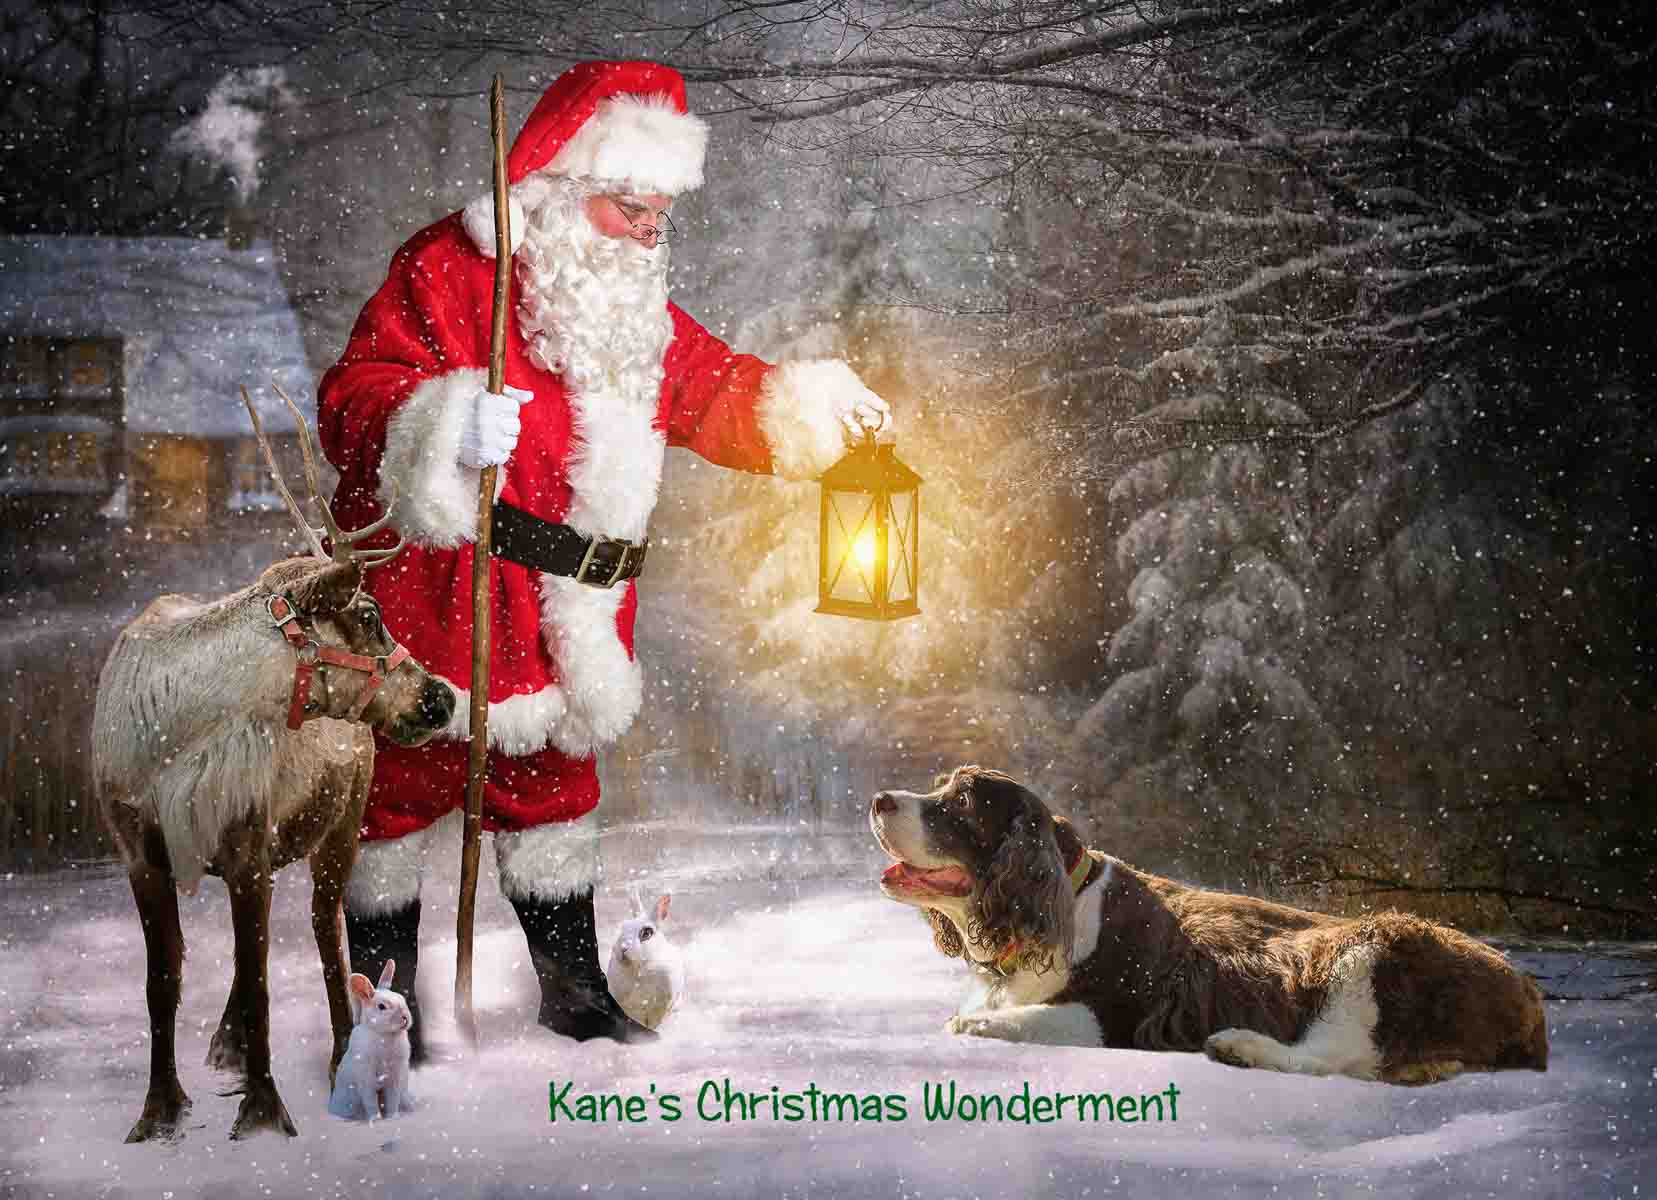 A man dressed as santa claus holding a lantern next to two dogs.